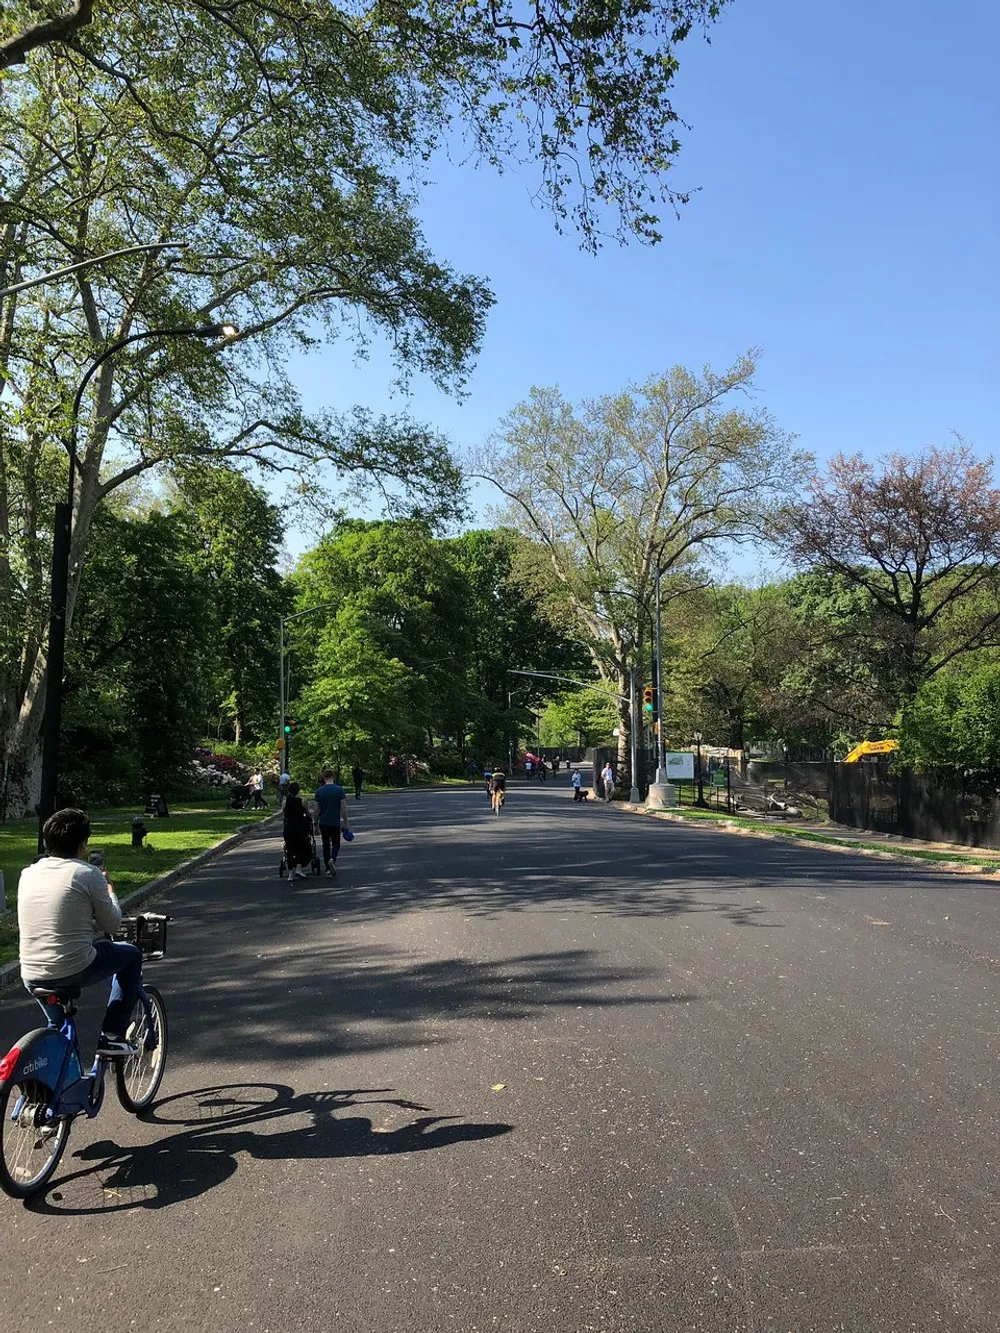 People are enjoying outdoor activities on a sunny day in a tree-lined park with a person riding a bicycle in the foreground